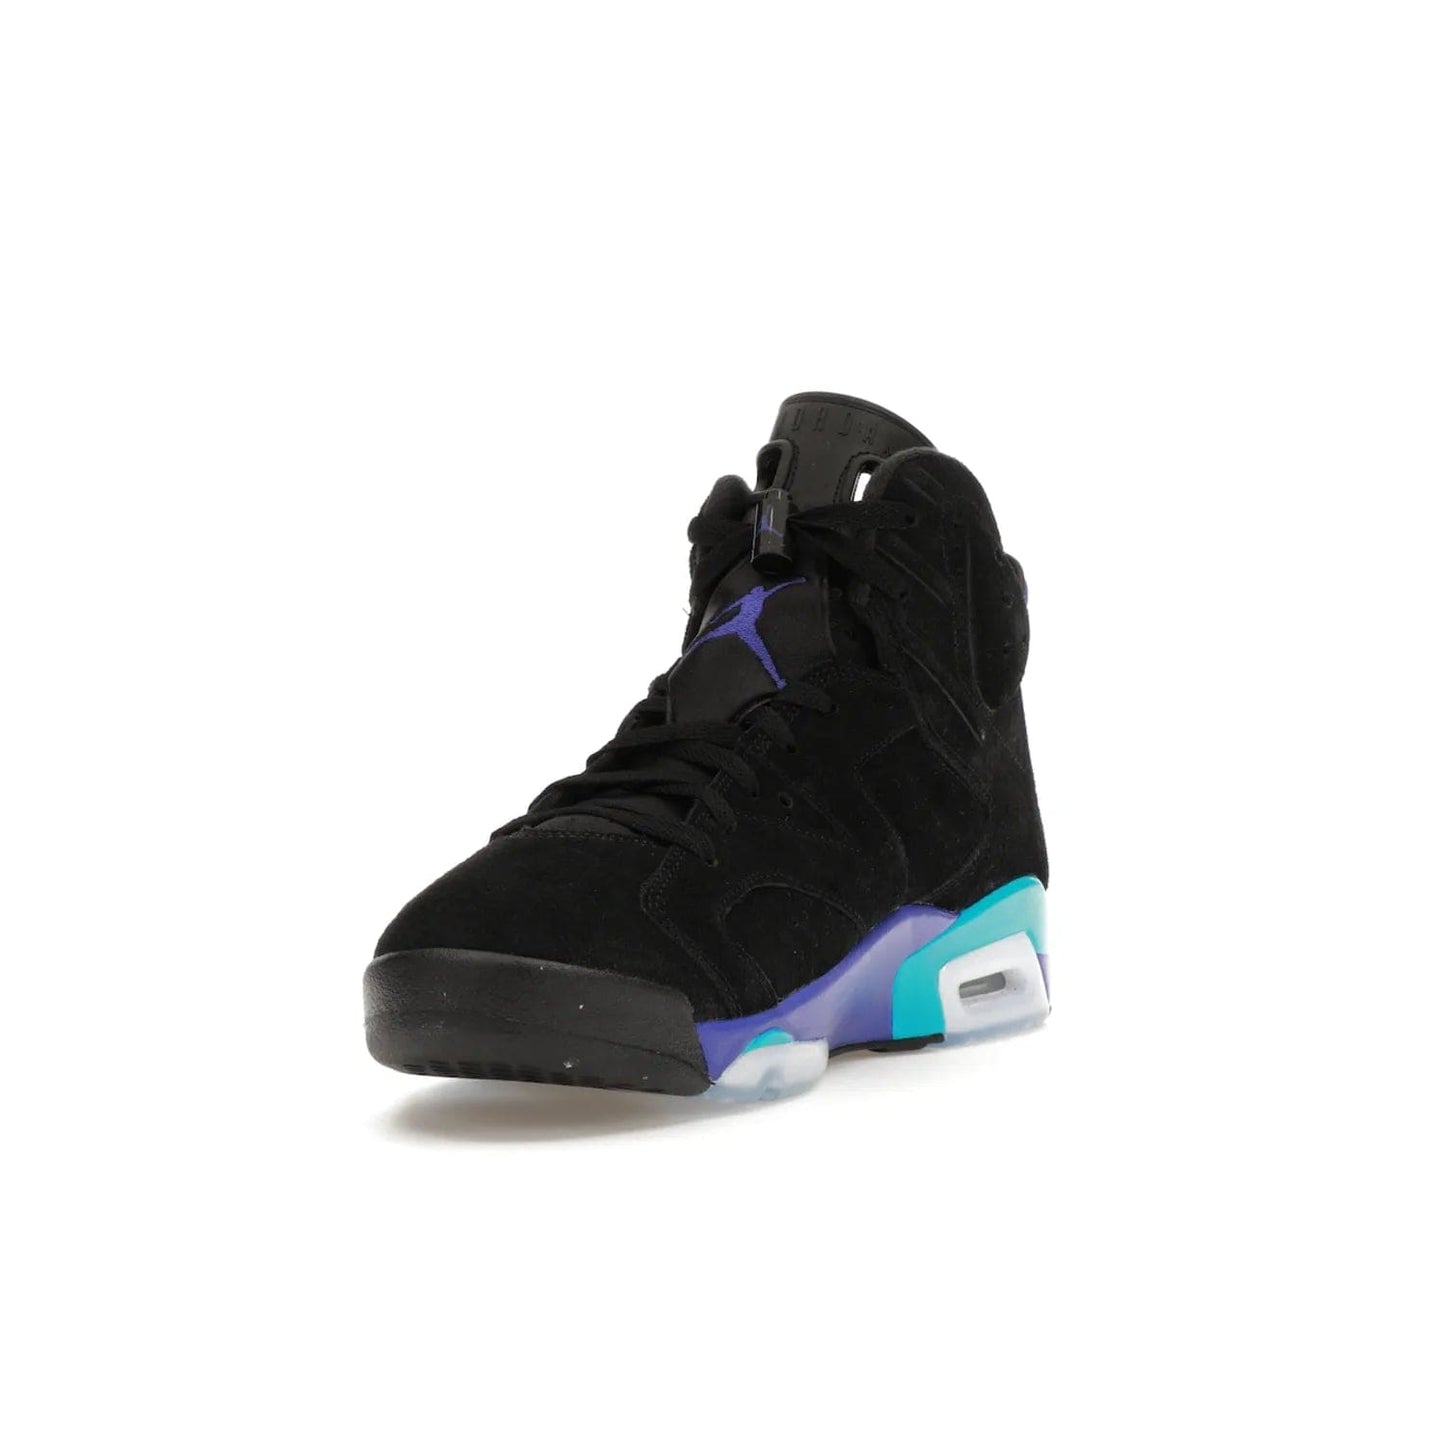 Jordan 6 Retro Aqua - Image 13 - Only at www.BallersClubKickz.com - Feel the classic Jordan 6 Retro Aqua paired with modern style. Black, Bright Concord, and Aquatone hues are crafted with a supple suede and rubberized heel tab. This standout sneaker adds signature Jordan elements at $200. Elevate your style with the Jordan 6 Retro Aqua.